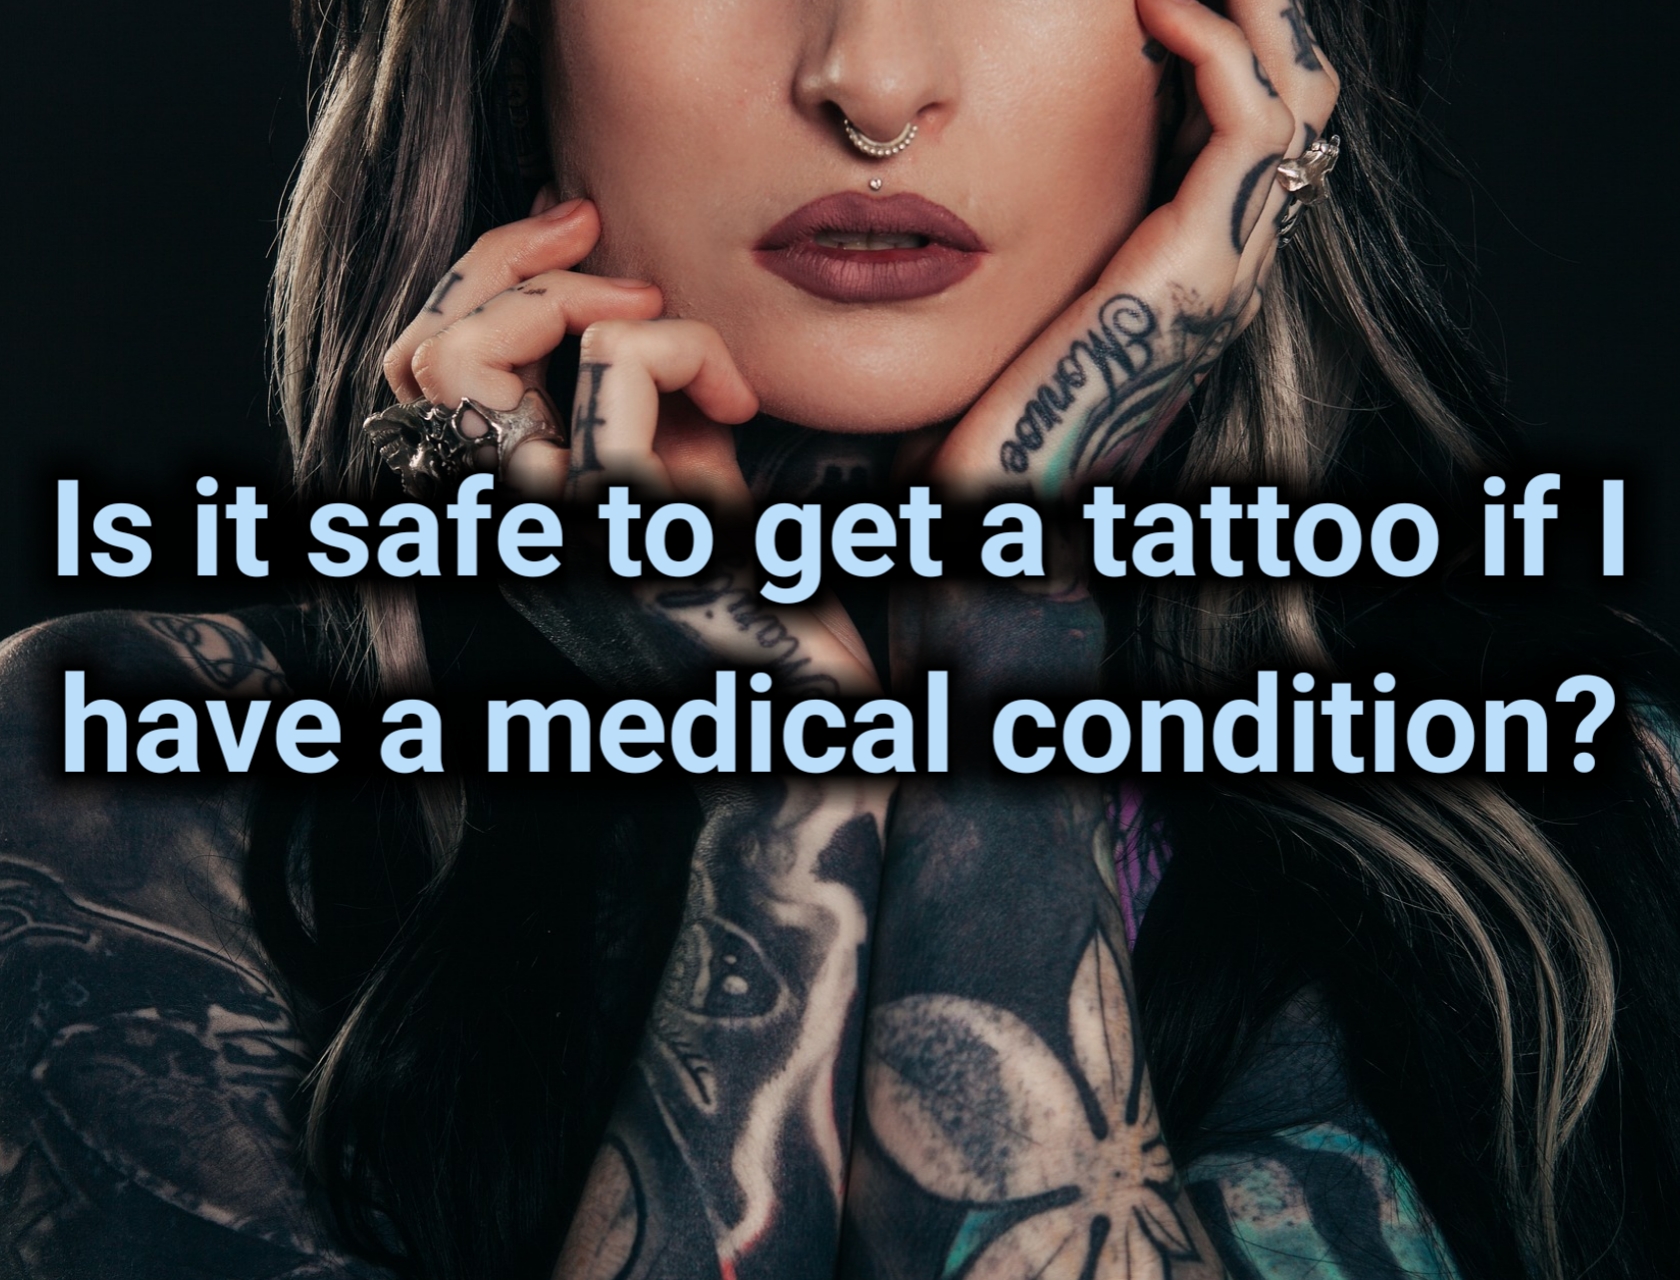 Is it safe to get a tattoo if I have a medical condition